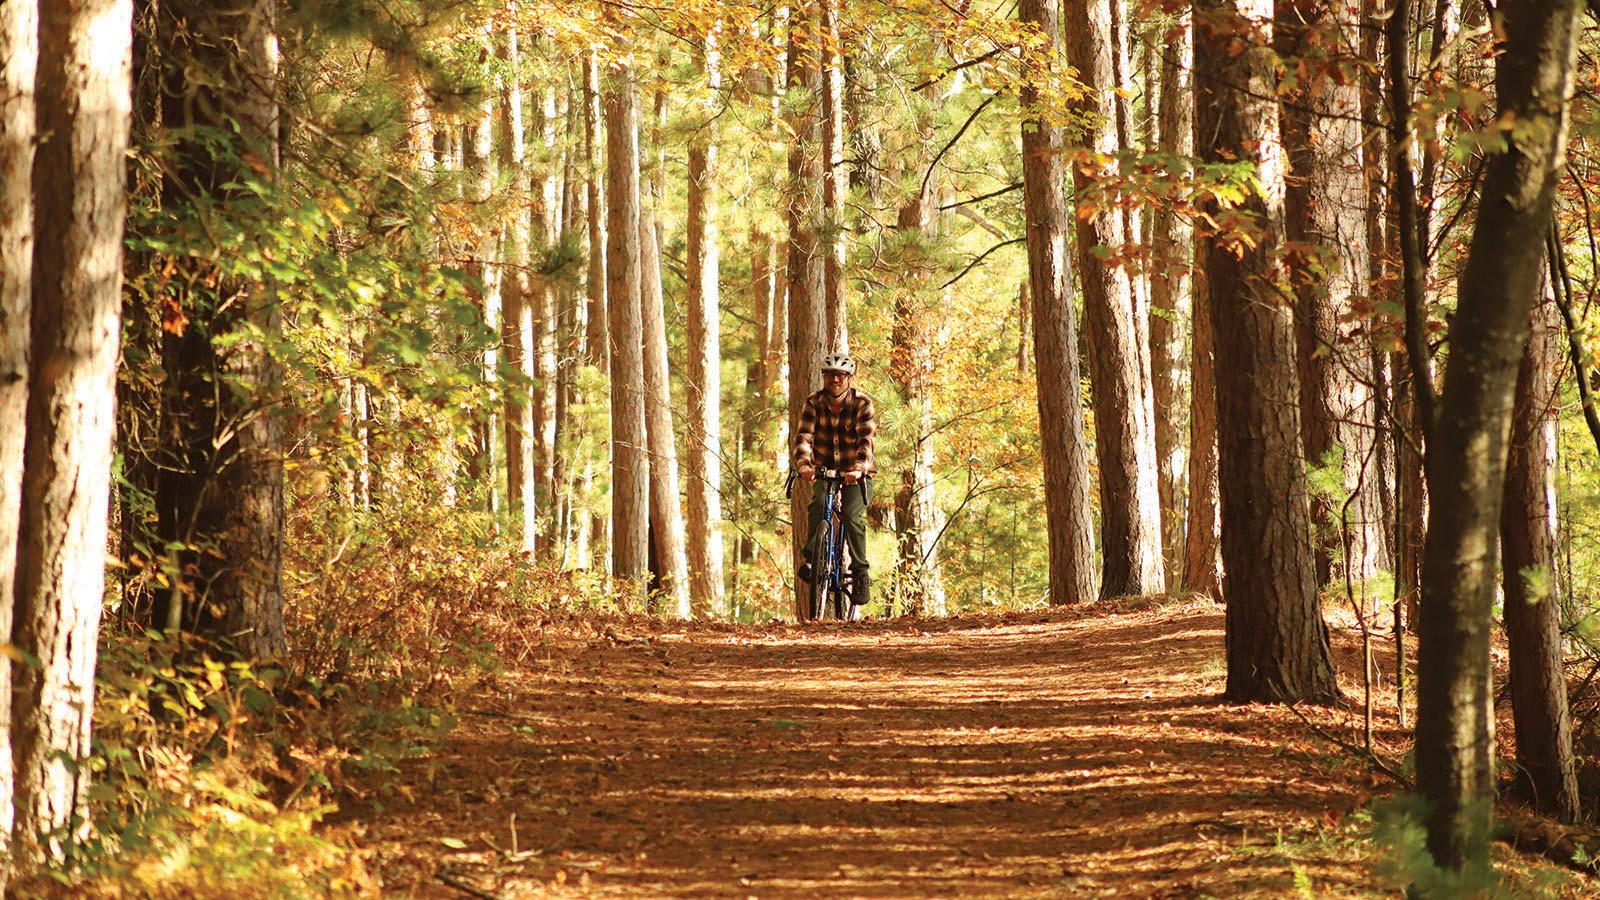 Bike riding a trail surrounded by trees on a beautiful fall day